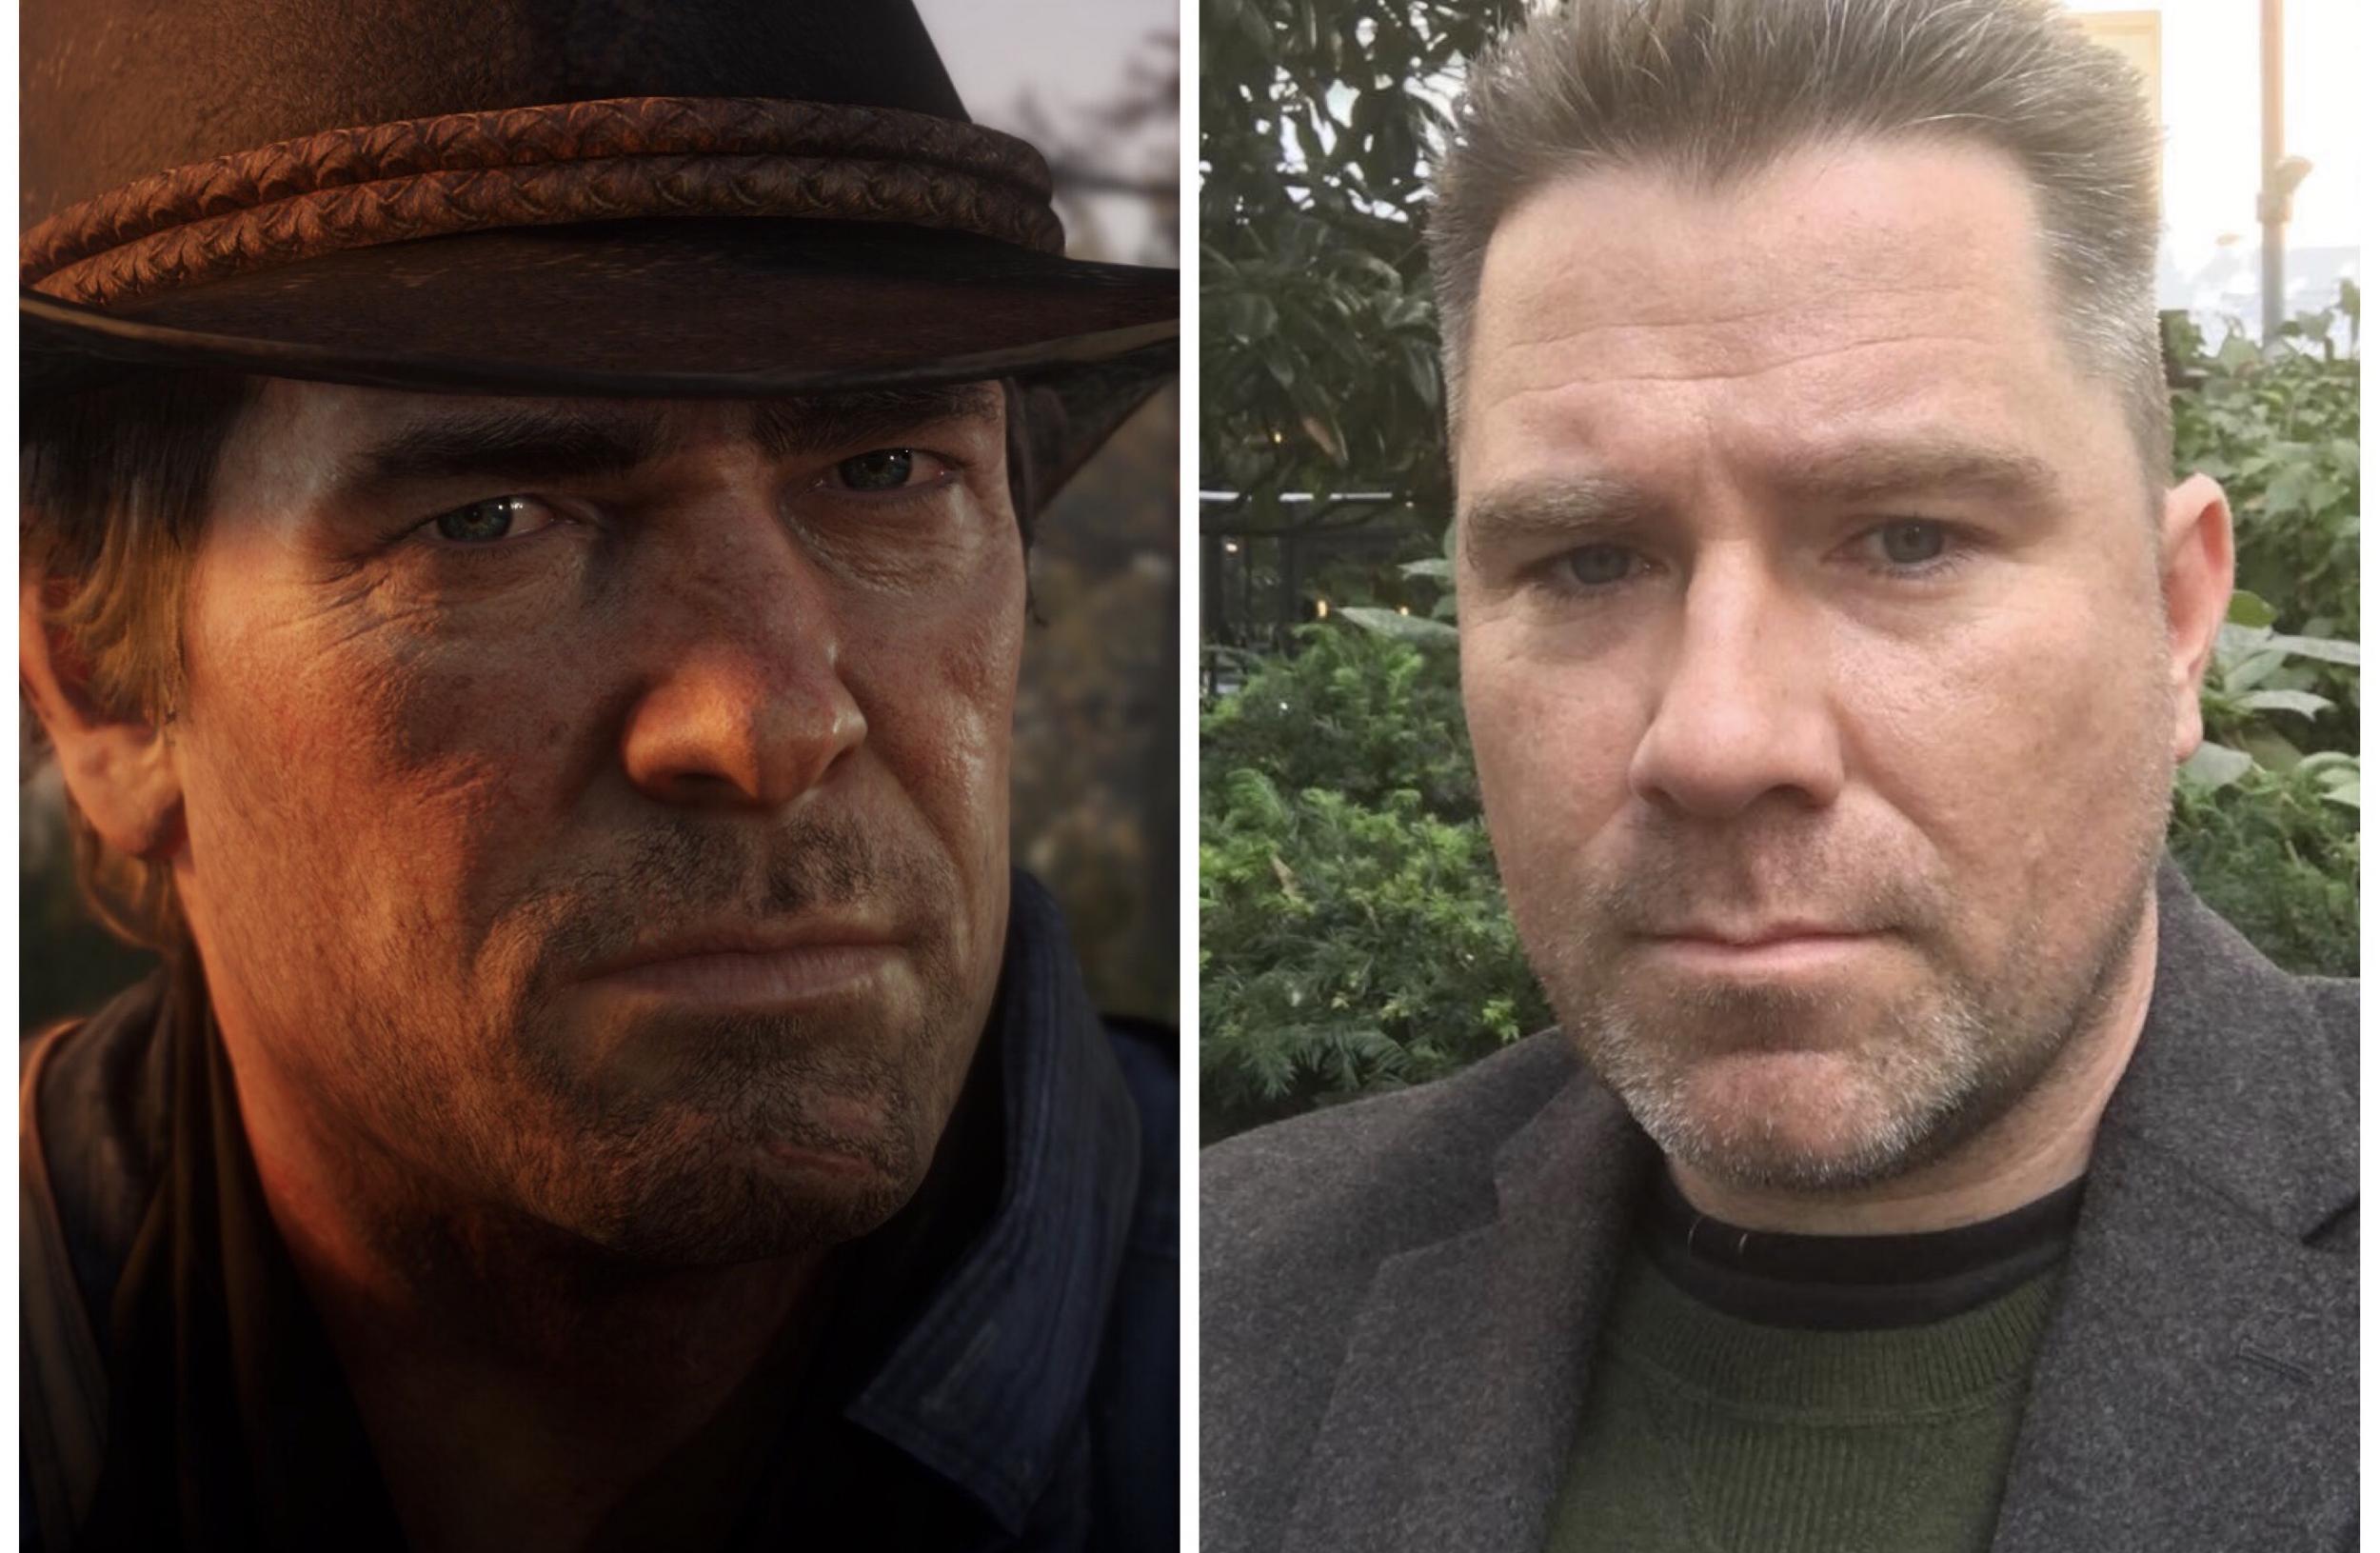 Red Dead Redemption 2: Actors Who Could Play Arthur Morgan